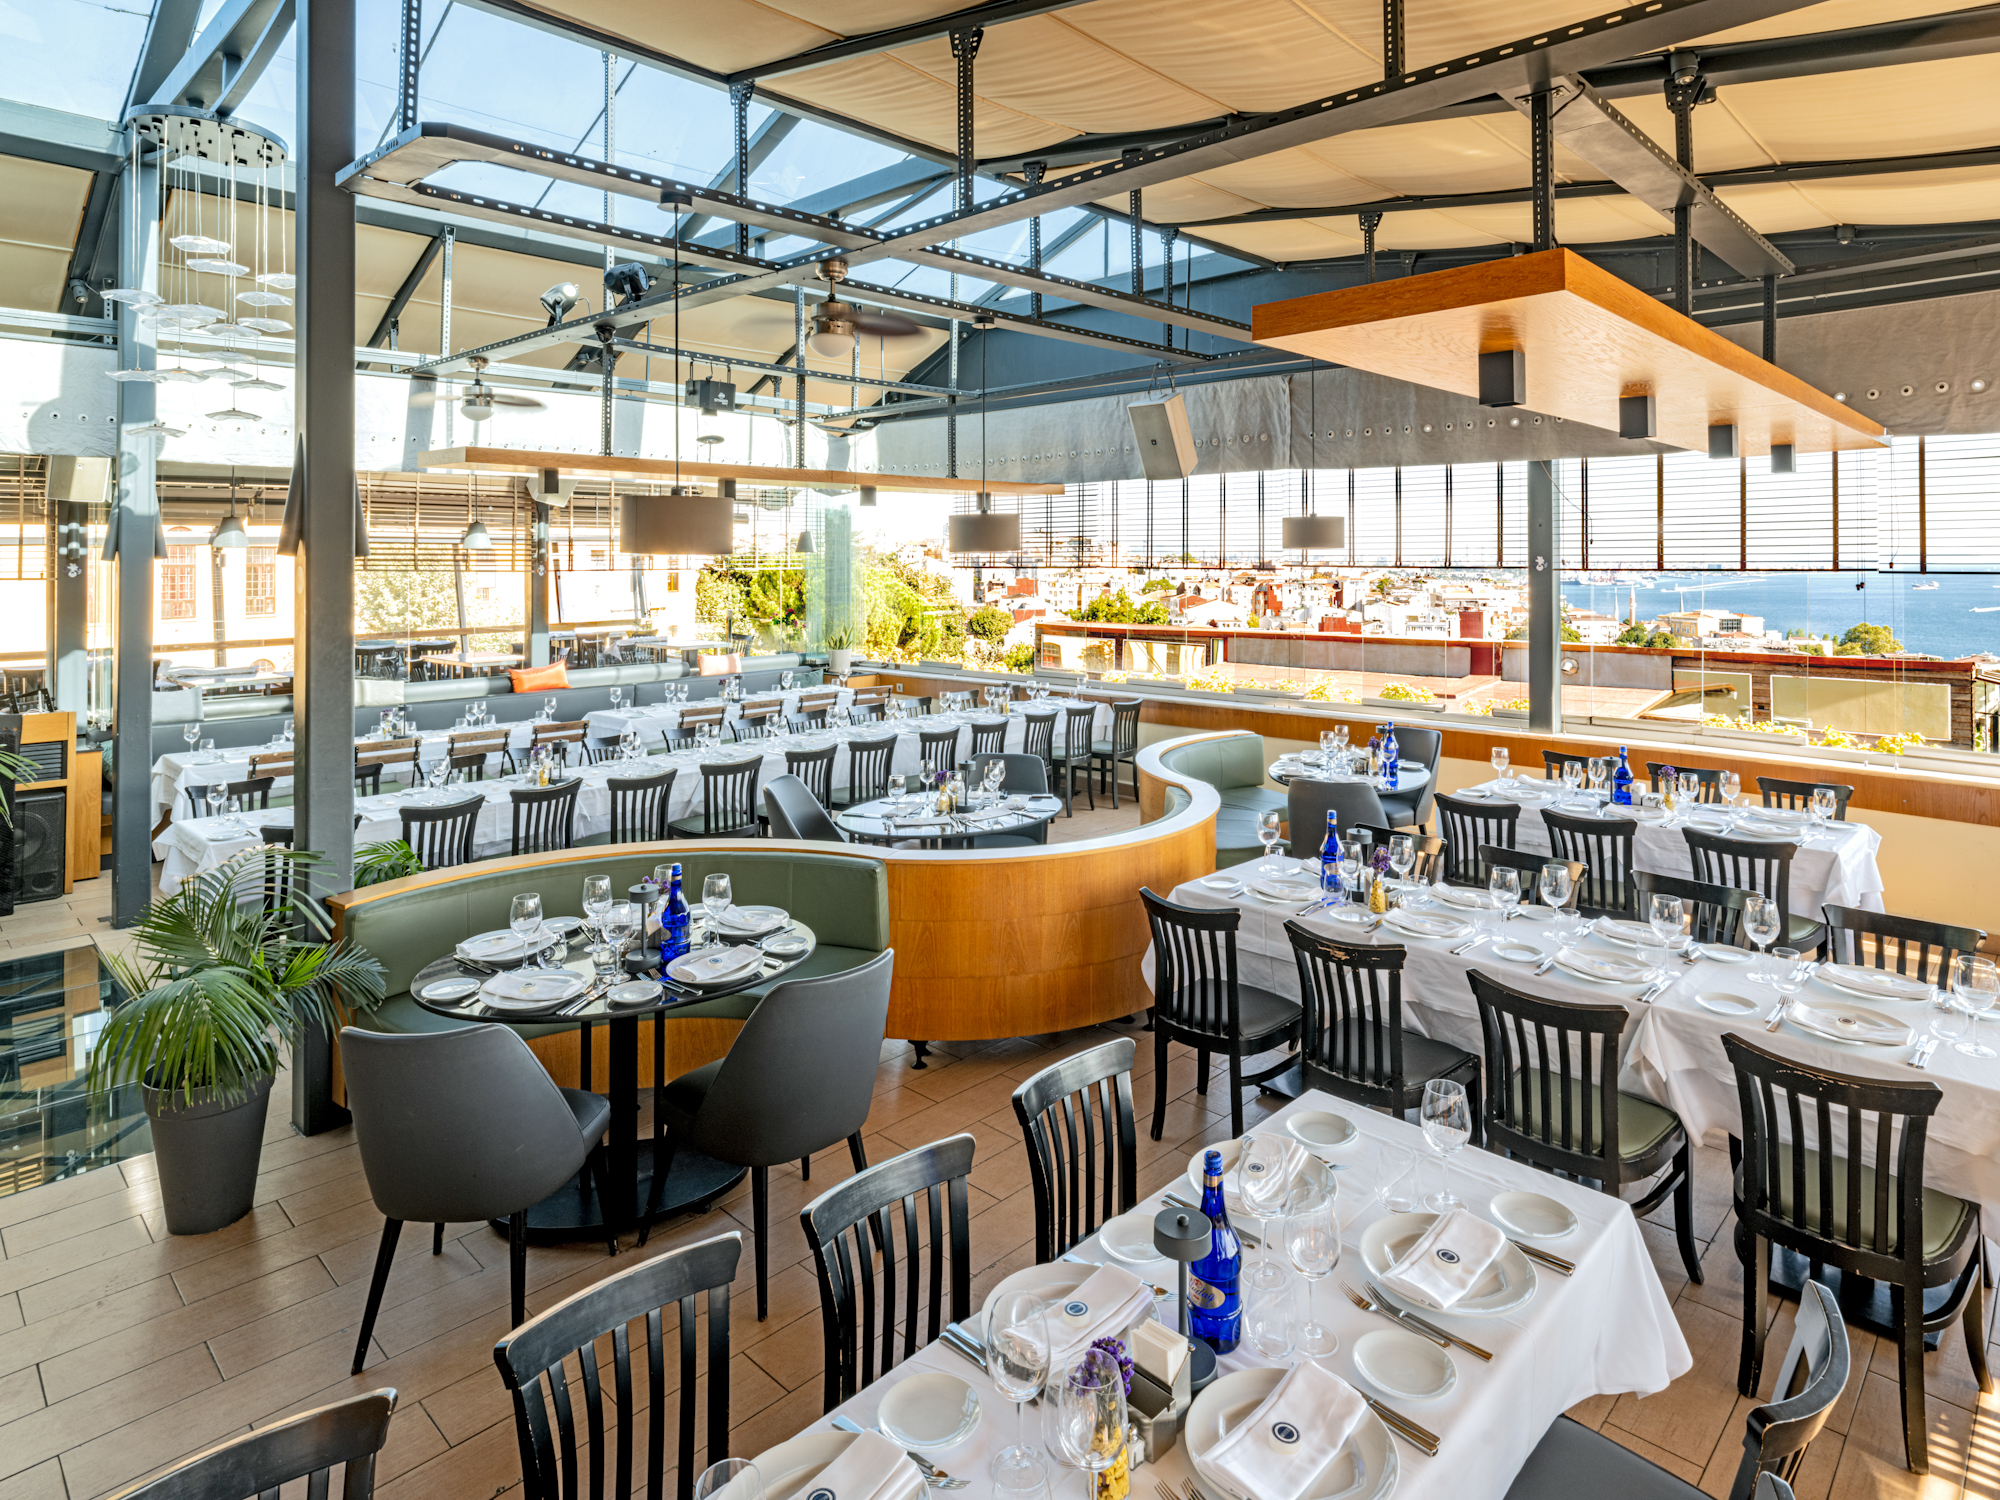 Organise a special meal for your company in Litera's large and spacious environment and strengthen your cooperation.